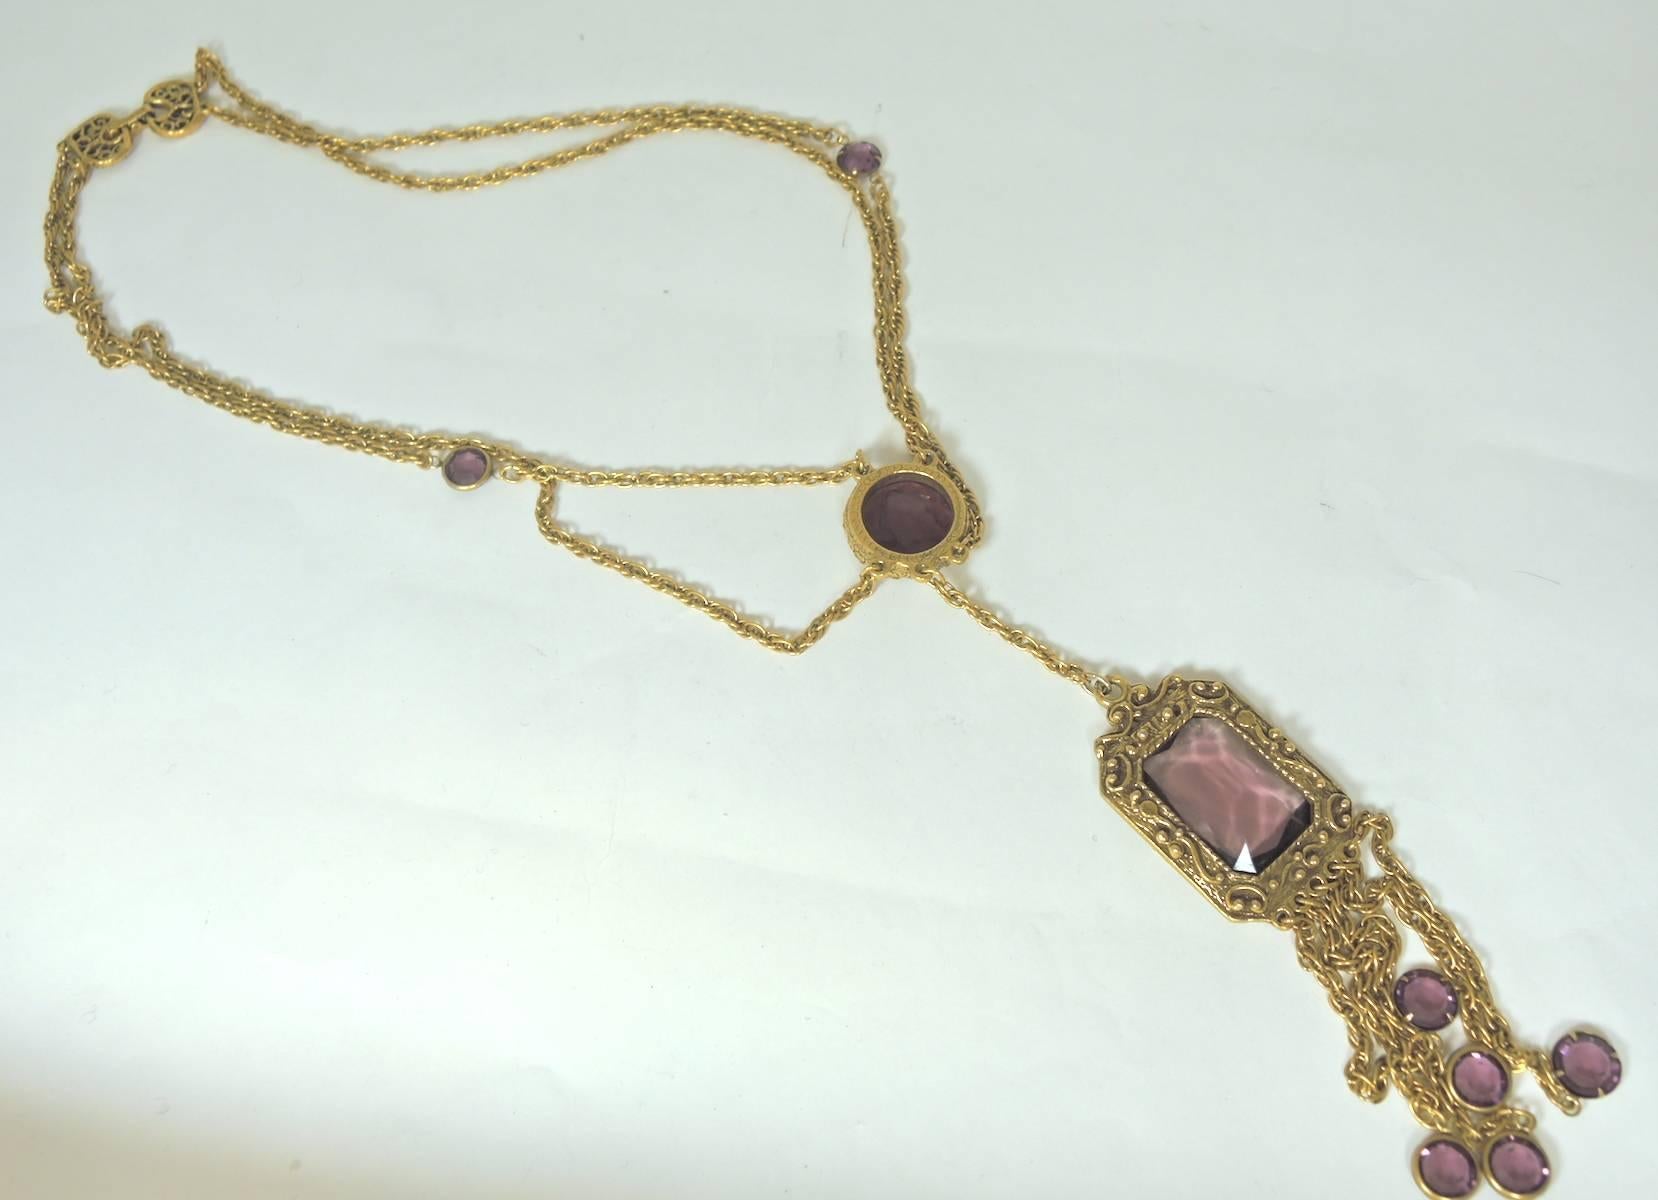 This exquisite vintage necklace is very unusual. It features a double rope chain that swags to create a chatelaine. It has two faceted and prong set amethyst stones halfway down one of the necklaces. The necklace leads to a lovely intaglio glass